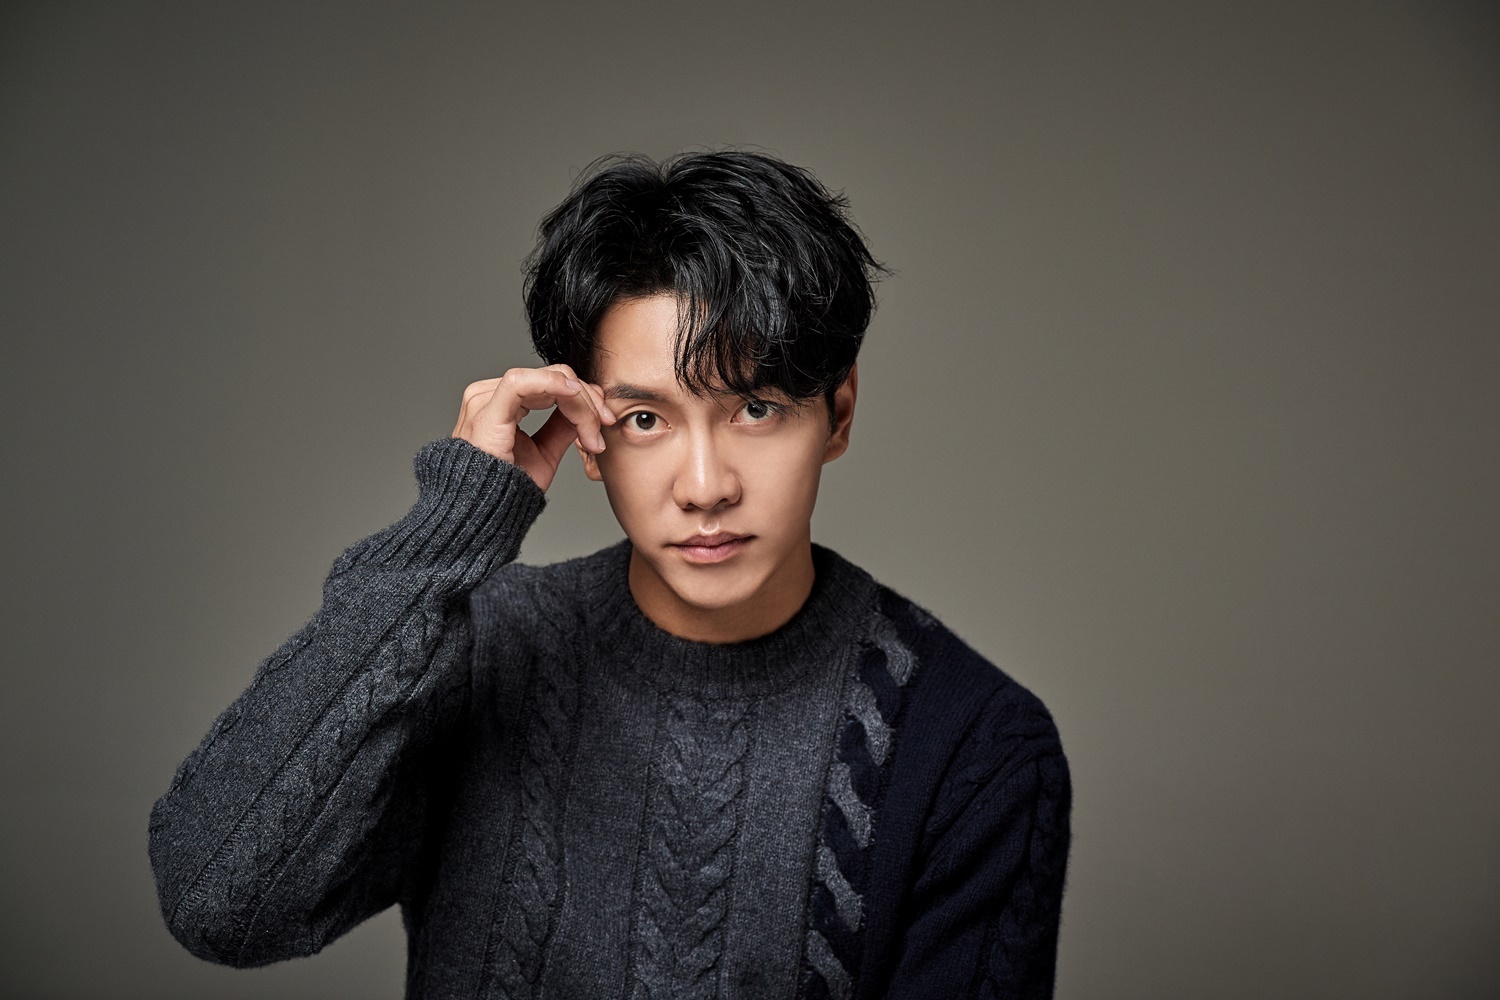 ..The work day and day retirement for the improvement of the secondLee Seung-gi, 32, made his debut at seventeen and has been running for 15 years without a hint of exhaustion.He played all-weather as singer Lee Seung-gi, actor Lee Seung-gi and entertainer Lee Seung-gi; was accidentless and unscathed, and fiercer than anyone else.We are 33 years oldI knew it, and I realized that I had to hide for a while to go farther.Lee Seung-gi, who faced SBS gilt drama Vagabond, said, I stayed on medicine. I was prescribed from resonance to vitamins.I love busy things, and I have a lot of work to find me, he said. I felt this time. I also needed to breathe.If there is less energy than the energy that is poured out, there will be problems. It is a curious thing to say, because he appeared when he turned on TV, crossing drama and entertainment, and joined together with passion after the discharge.Lee Seung-gi laughed, saying, To catch my breath on my standards is to work as much as others for a while.Asked again why, he said, I realized that I had to work enough to manage my own physical strength and mental strength independently, and the density of the result was further increased.As such, Vagabond was important to Lee Seung-gi, and he was heavy: The right action was the first time, after all the hard work of the role of the image that I always hoped for.I was always close to the exercise. Thanks to the staff, I did not know that the high-quality action gods were completed. I am confident that there was no do action, because I know that the more fun I have, the more I have spent two months with all the actors to practice.Its a result of three or four repeated times to One Week, he said.Thanks to Vagabond, Lee Seung-gi received a gift saying Action is good.Until Vagabond, my image was more like a romantic comedy or melodrama, I would like to express that I received a gift called Action.It was hard, but if you ask Can you do it again, you will answer I do not have a reason not to do it.Whether it is an action for revenge or an action for the birth of a hero, I would like to welcome any action that contains my story. He had just emphasized breathing, but the story of work was Lee Seung-gi, who gave a new eye to the eye.Lee Seung-gi breathing was not meant to be a day-to-day retreat; it meant recharging, for better results.So when I asked what I wanted to do right away, I explained and persuaded my paintings without hesitation.Lee Seung-gi is also practicing to relieve. He said hes an entertainer who sees me and does everything well, so hes doing a less good practice.I was tired of unconsciously asking myself for perfection, and not giving myself any room for forgiveness in my responsibilities, and I should not be tired again.I feel like I have to practice a little loosening and putting down my obsession. I was wrong, I made a mistake, I was defeated, I did not want to admit it. It was a cheeky idea.I do not know why I tried to cover all of them. That doesnt mean Lee Seung-gi will throw away any of the music, acting or entertainment: Lee Seung-gi said, All three of the filmography Ive already built have been included.It is strange to beat something away. The most important thing is that I love all of them. I have some know-how to enjoy without power. I will not miss it. Instead, perfection becomes more and more important. I dont want to do anything about it. Its Age that shouldnt be done now.I am in my thirties. I have to work deeper than before. I do entertainment like a hobby, but I should not take responsibility for shooting in the meantime.Acting and singing are also not strong, but it should not be a role that you do not like, a single album right now, or an OST level. Leaving work, young Lee Seung-gi was also more afflicted than before: We are Age, thirty-four next year, and it is time to draw Lee Seung-gis 40s and 50s.It is true that what I can do is gradually decreasing. In my twenties, the upper limit of things that were infinite in my imagination began to appear vaguely. When I face my seniors, I ask them about marriage and love. There is no right answer. People living independent lives with Lee Seung-gi.I am worried about what to prepare to clean up the way to go. iMBC  Photos